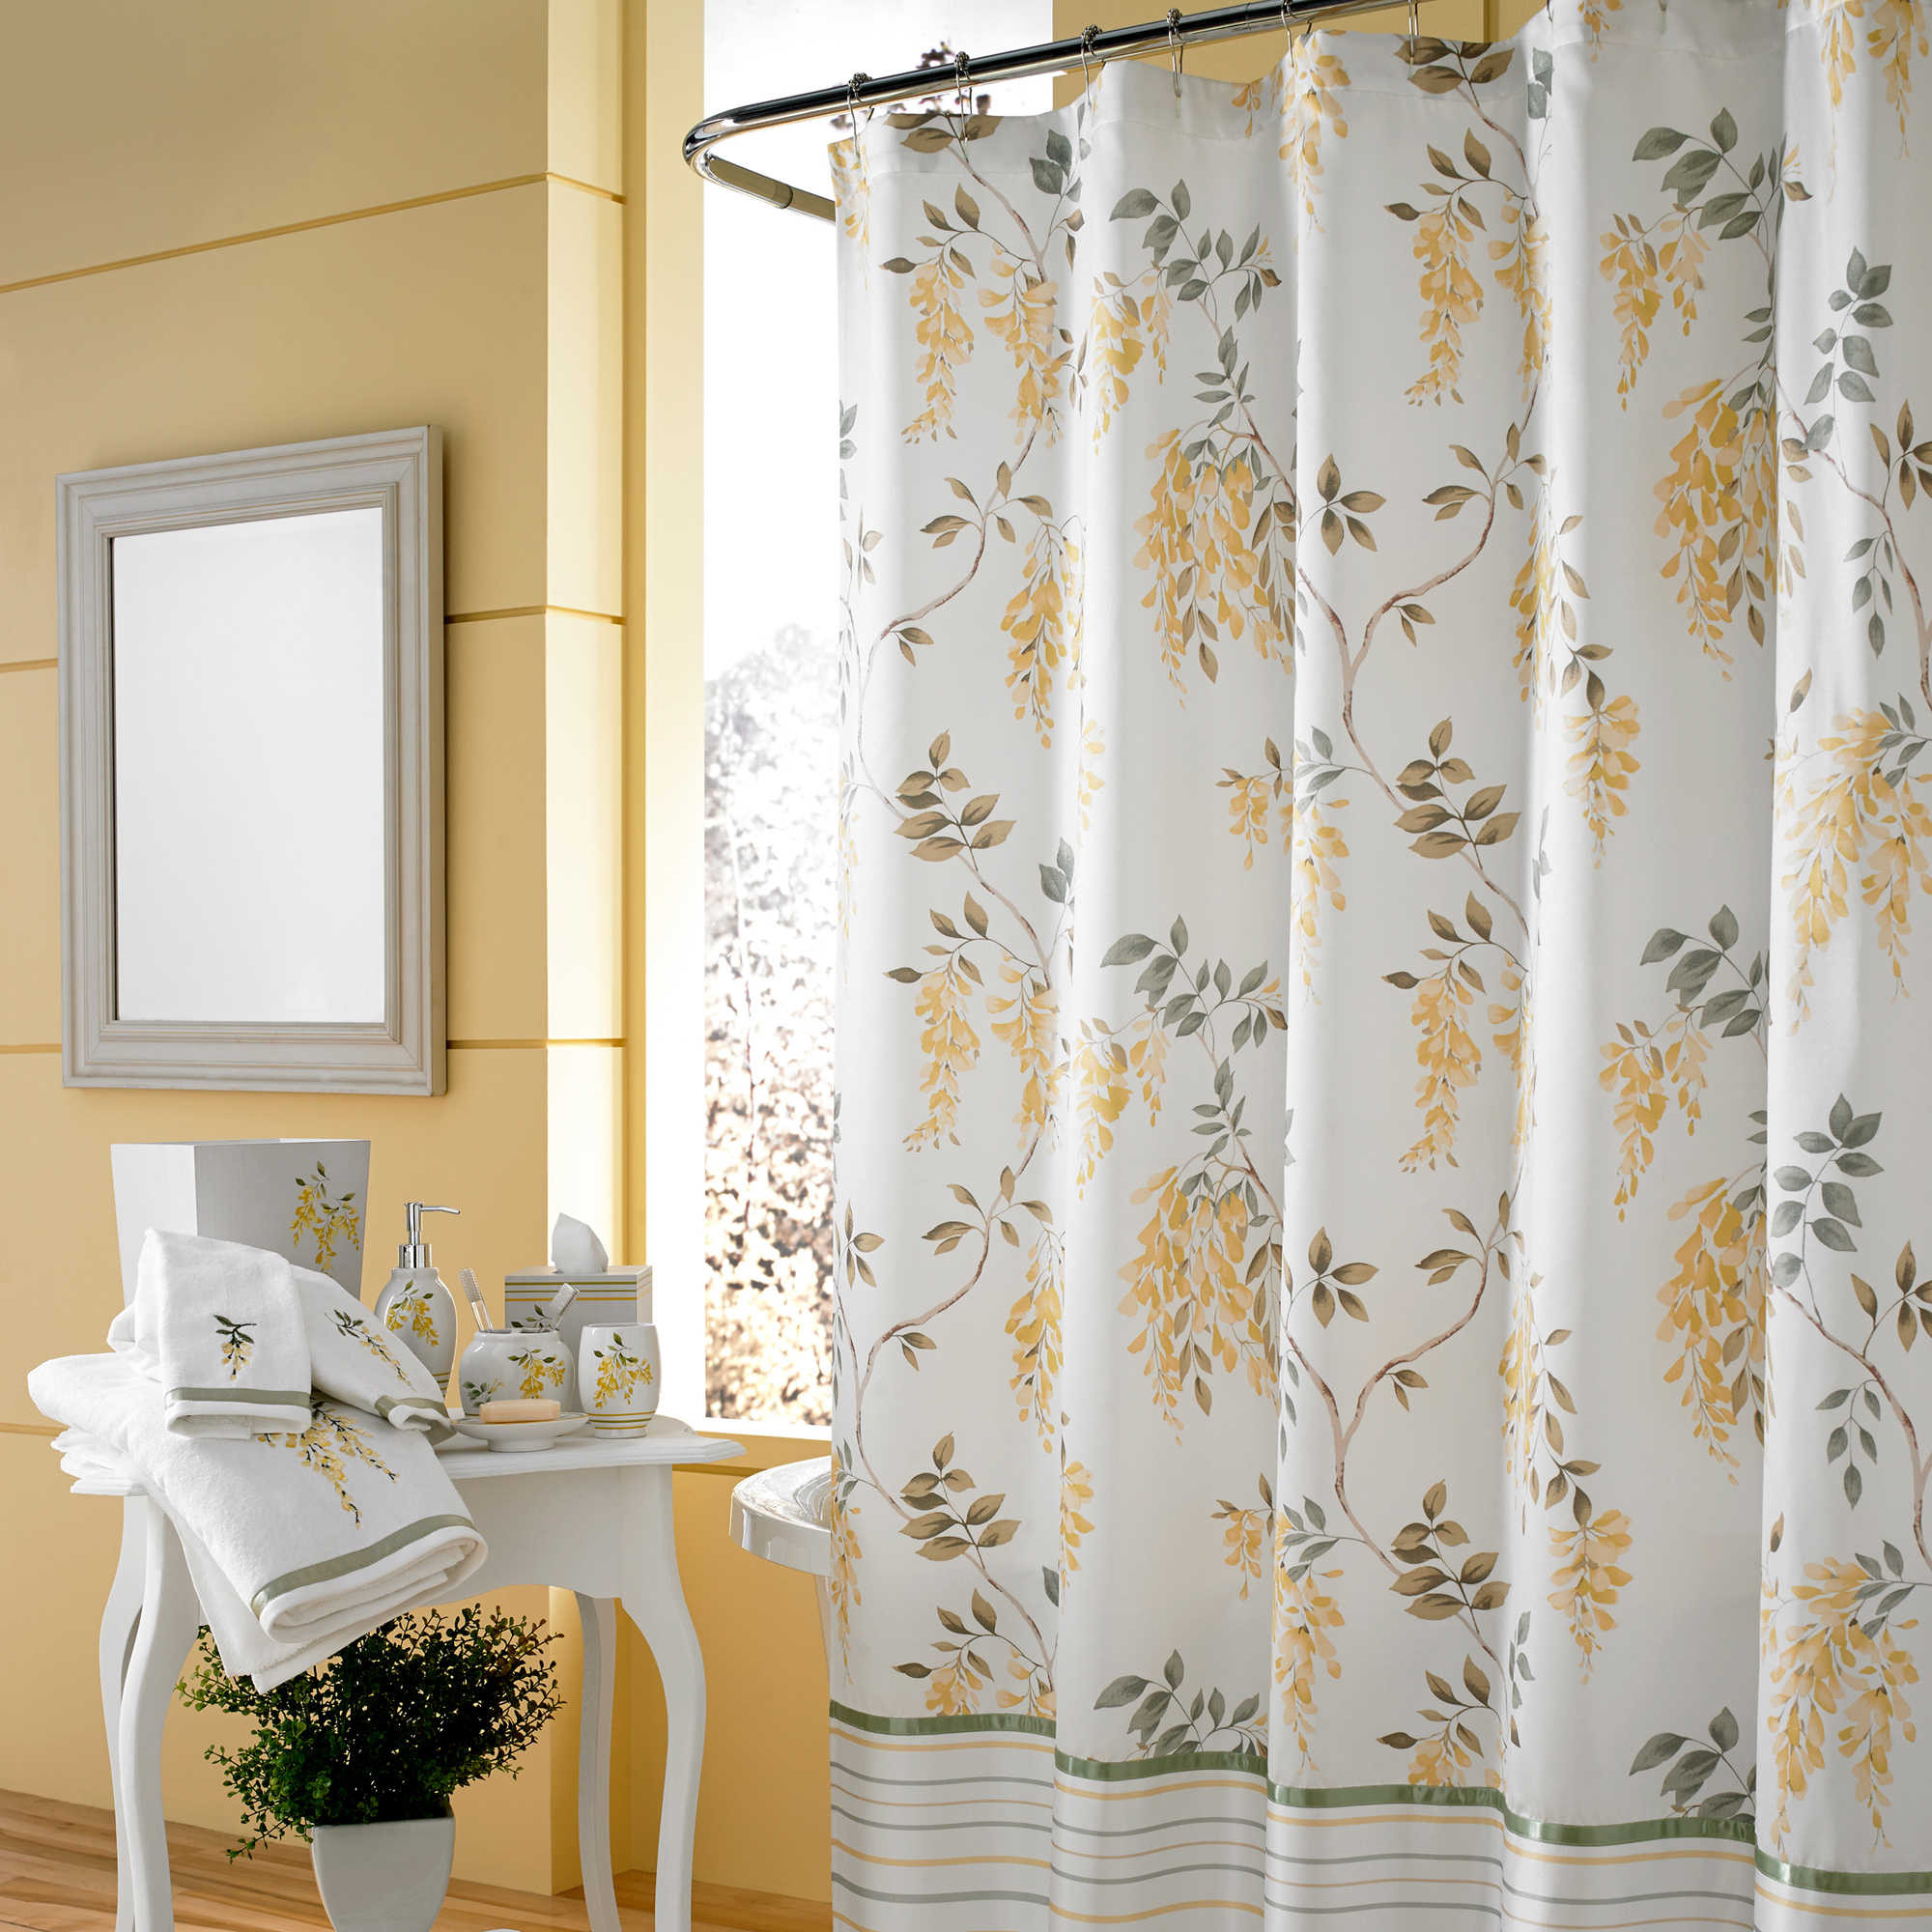 Bathroom Sets With Shower Curtain
 Bed Bath and Beyond Shower Curtains fer Great Look and